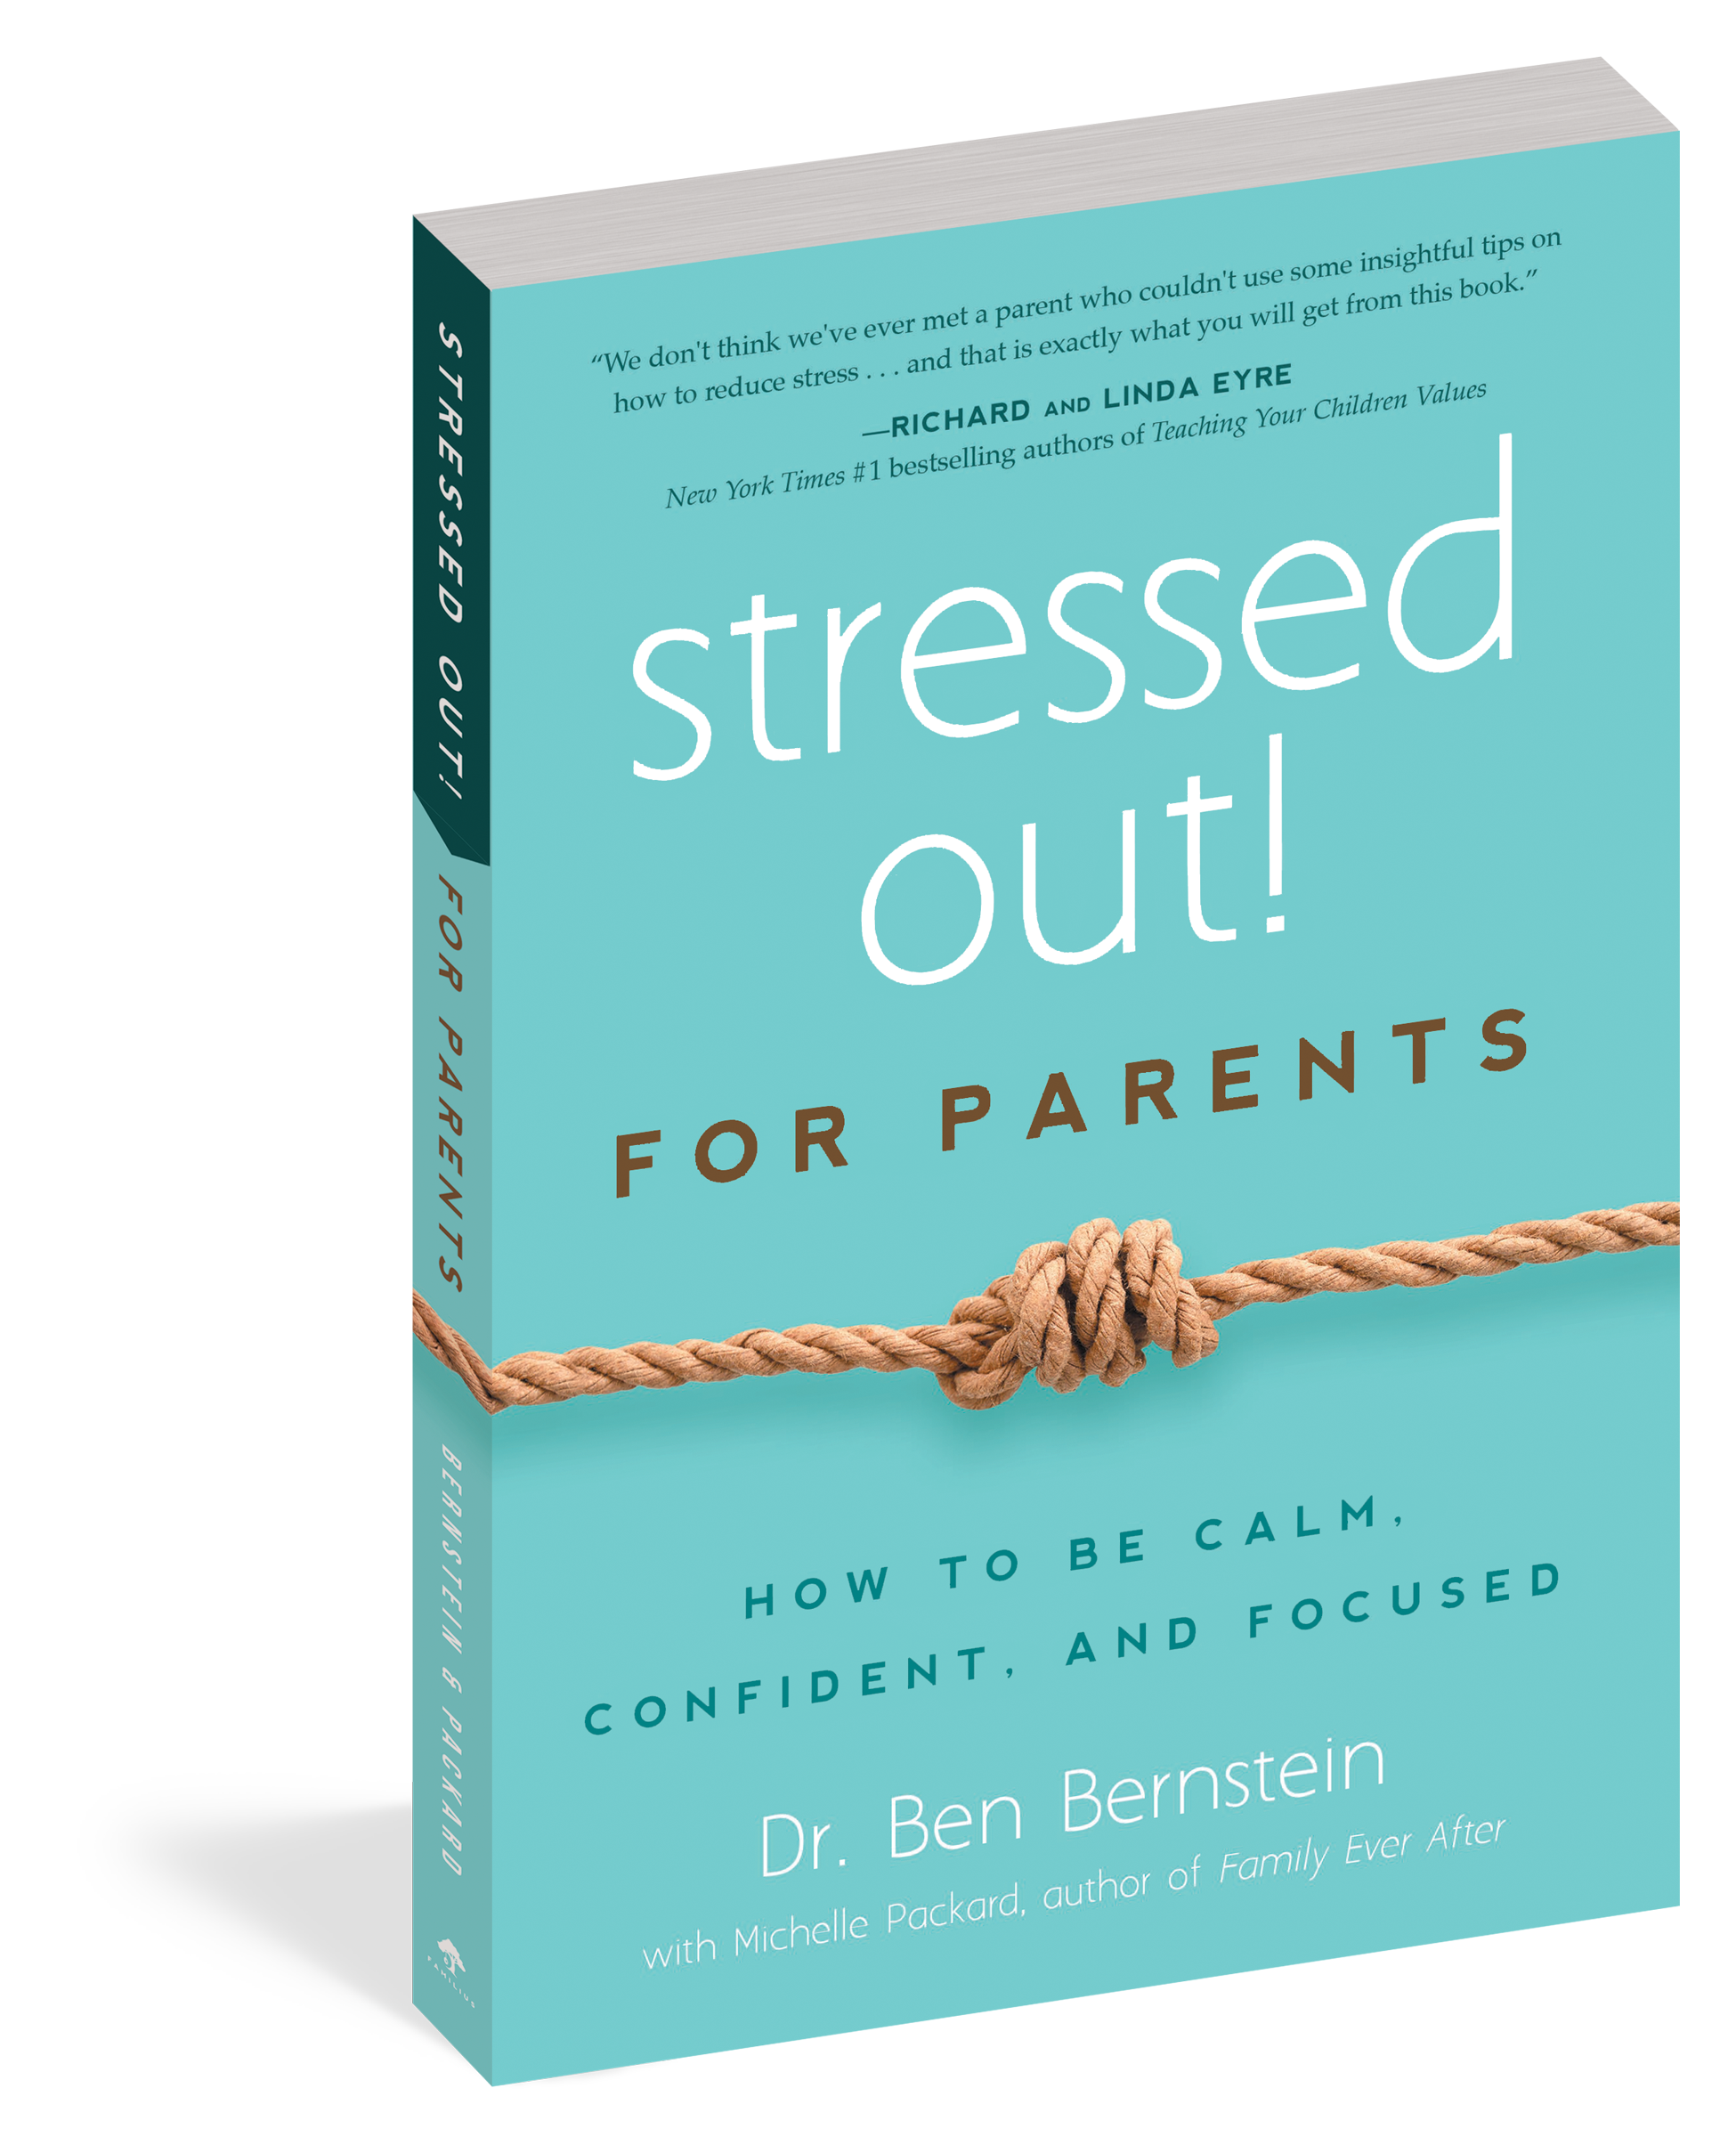 The cover of the book Stressed Out! For Parents